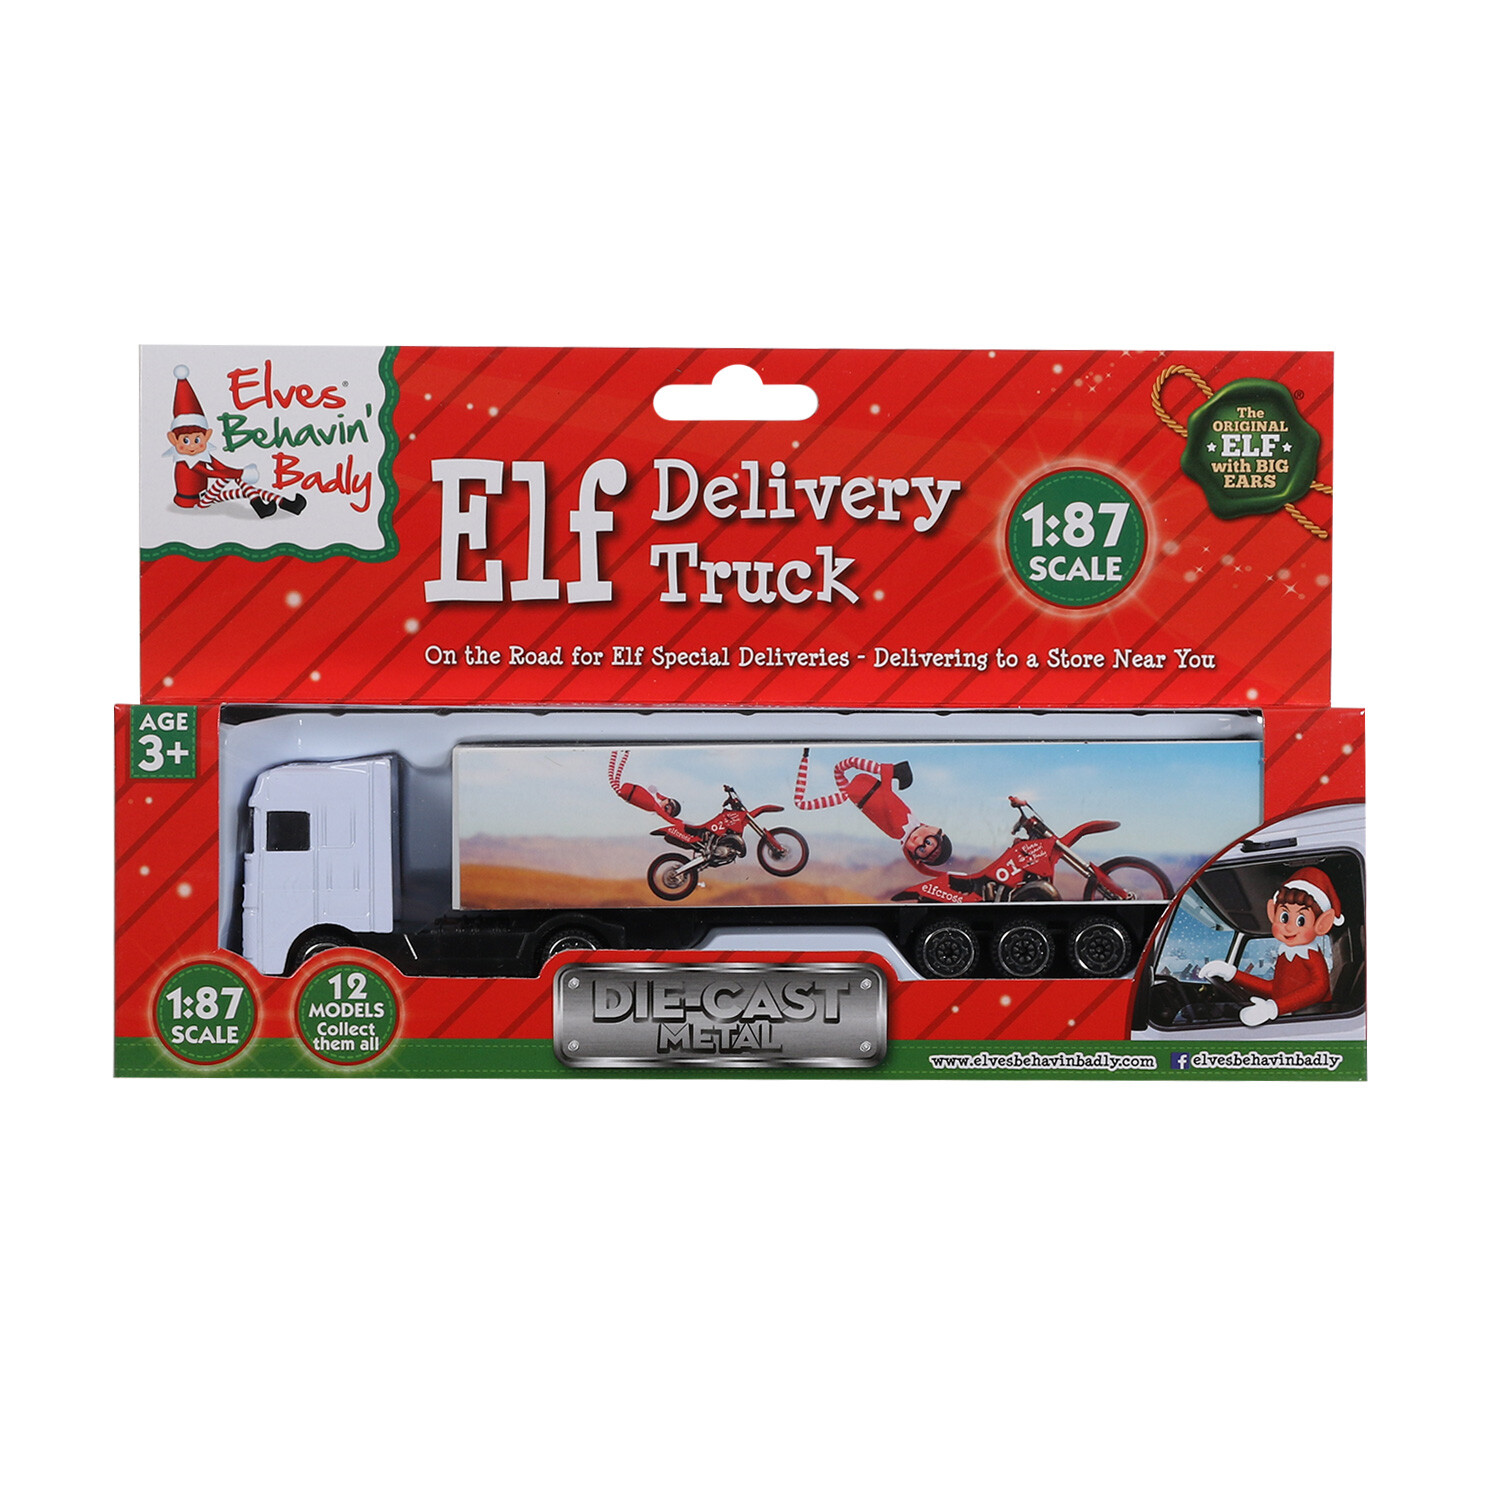 Elf Delivery Truck Image 7